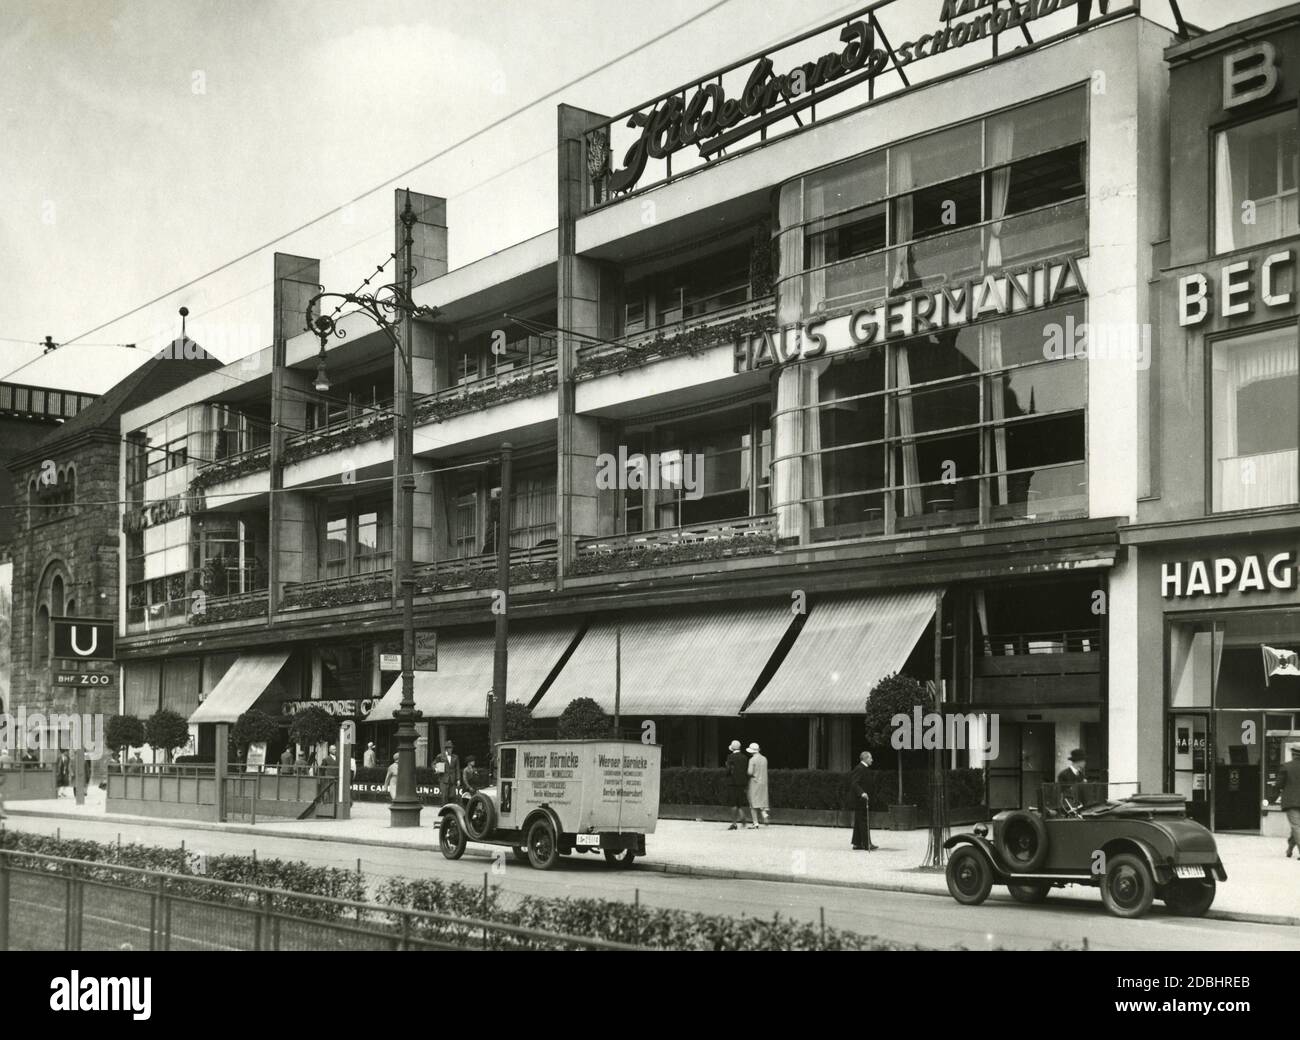 'The picture from 1930 shows the elegant and modern  Haus Germania at Hardenbergstrasse 29 in Berlin-Charlottenburg. Below were several restaurants, including the ''Conditorei Cafe Berlin''. On the roof, there is an advertisement for ''Hildebrand Kakao Schokolade''. In front of the building is a delivery van of the fruit juice press Werner Hoernicke from Berlin-Wilmersdorf.' Stock Photo